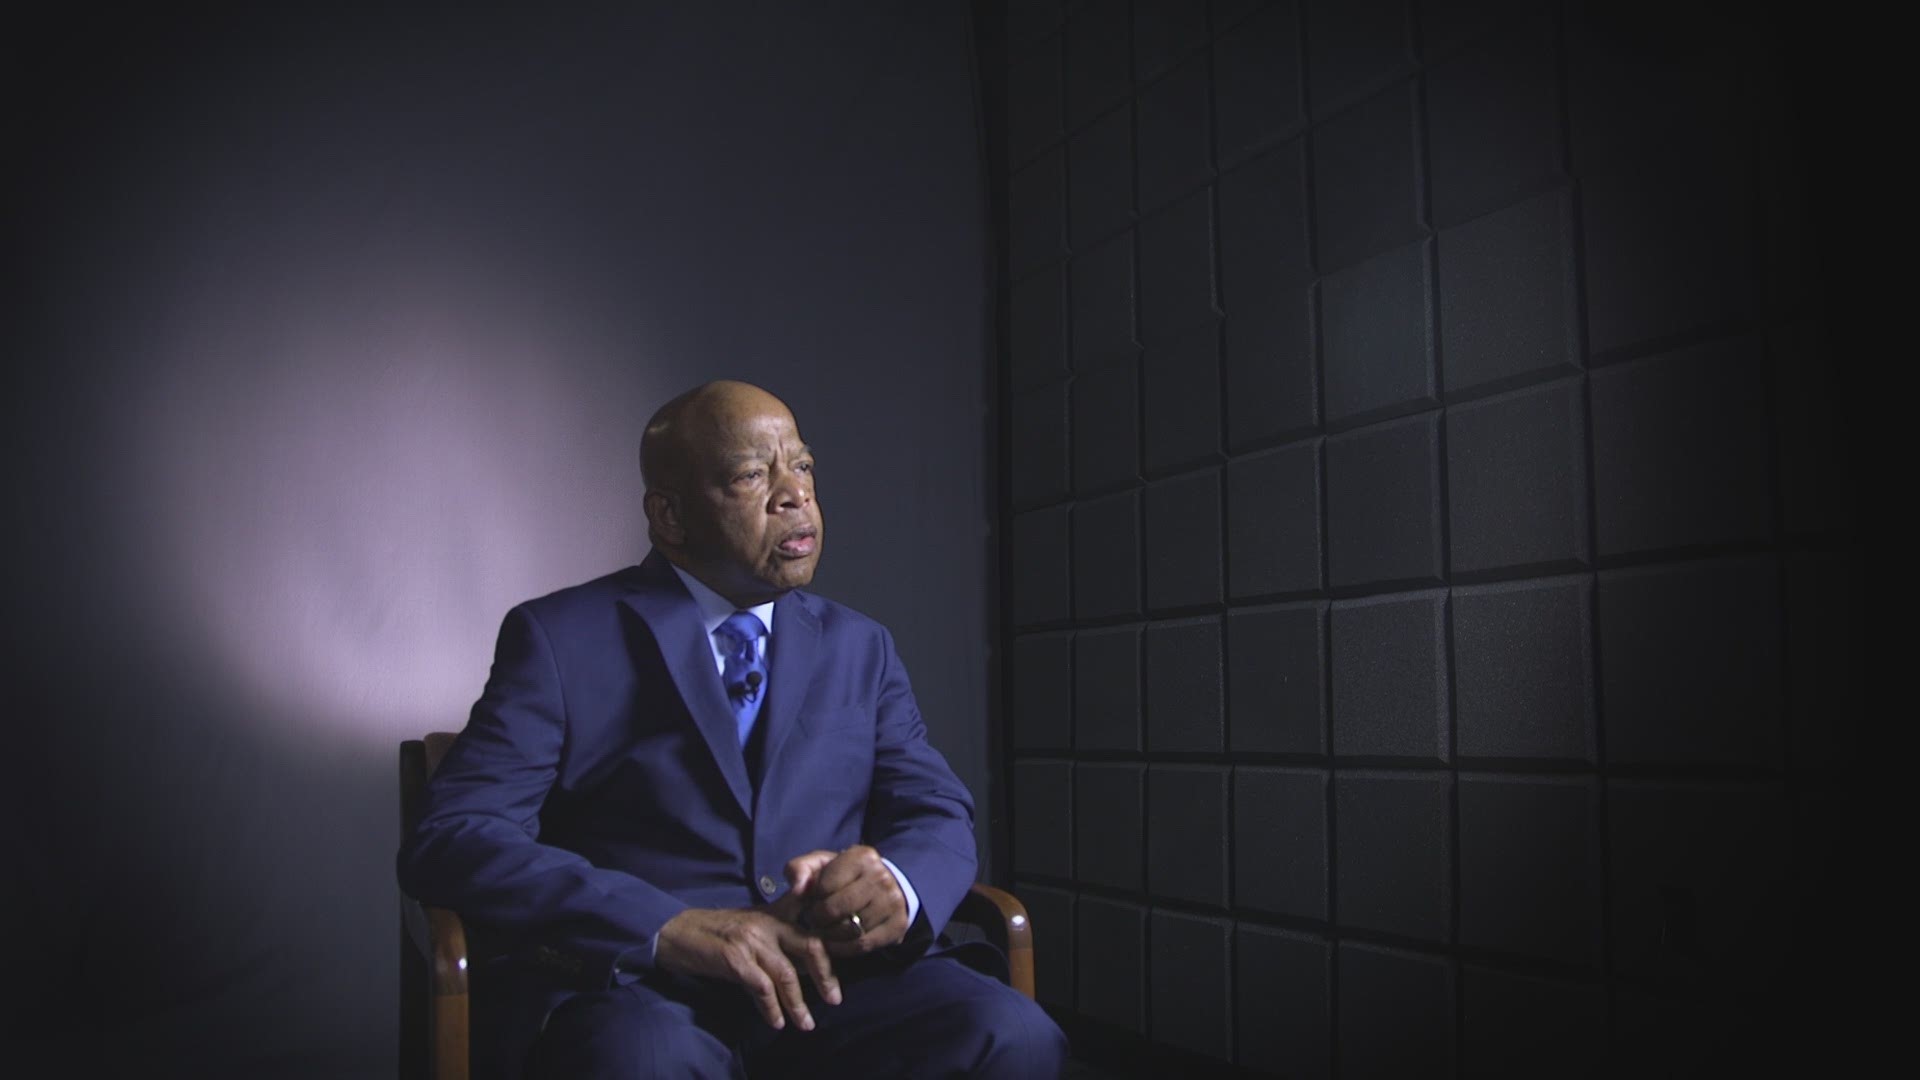 50 years after his friend Dr. Martin Luther King, Jr. was assassinated, Rep. John Lewis remembers his friends words or encouragement and shares his legacy.